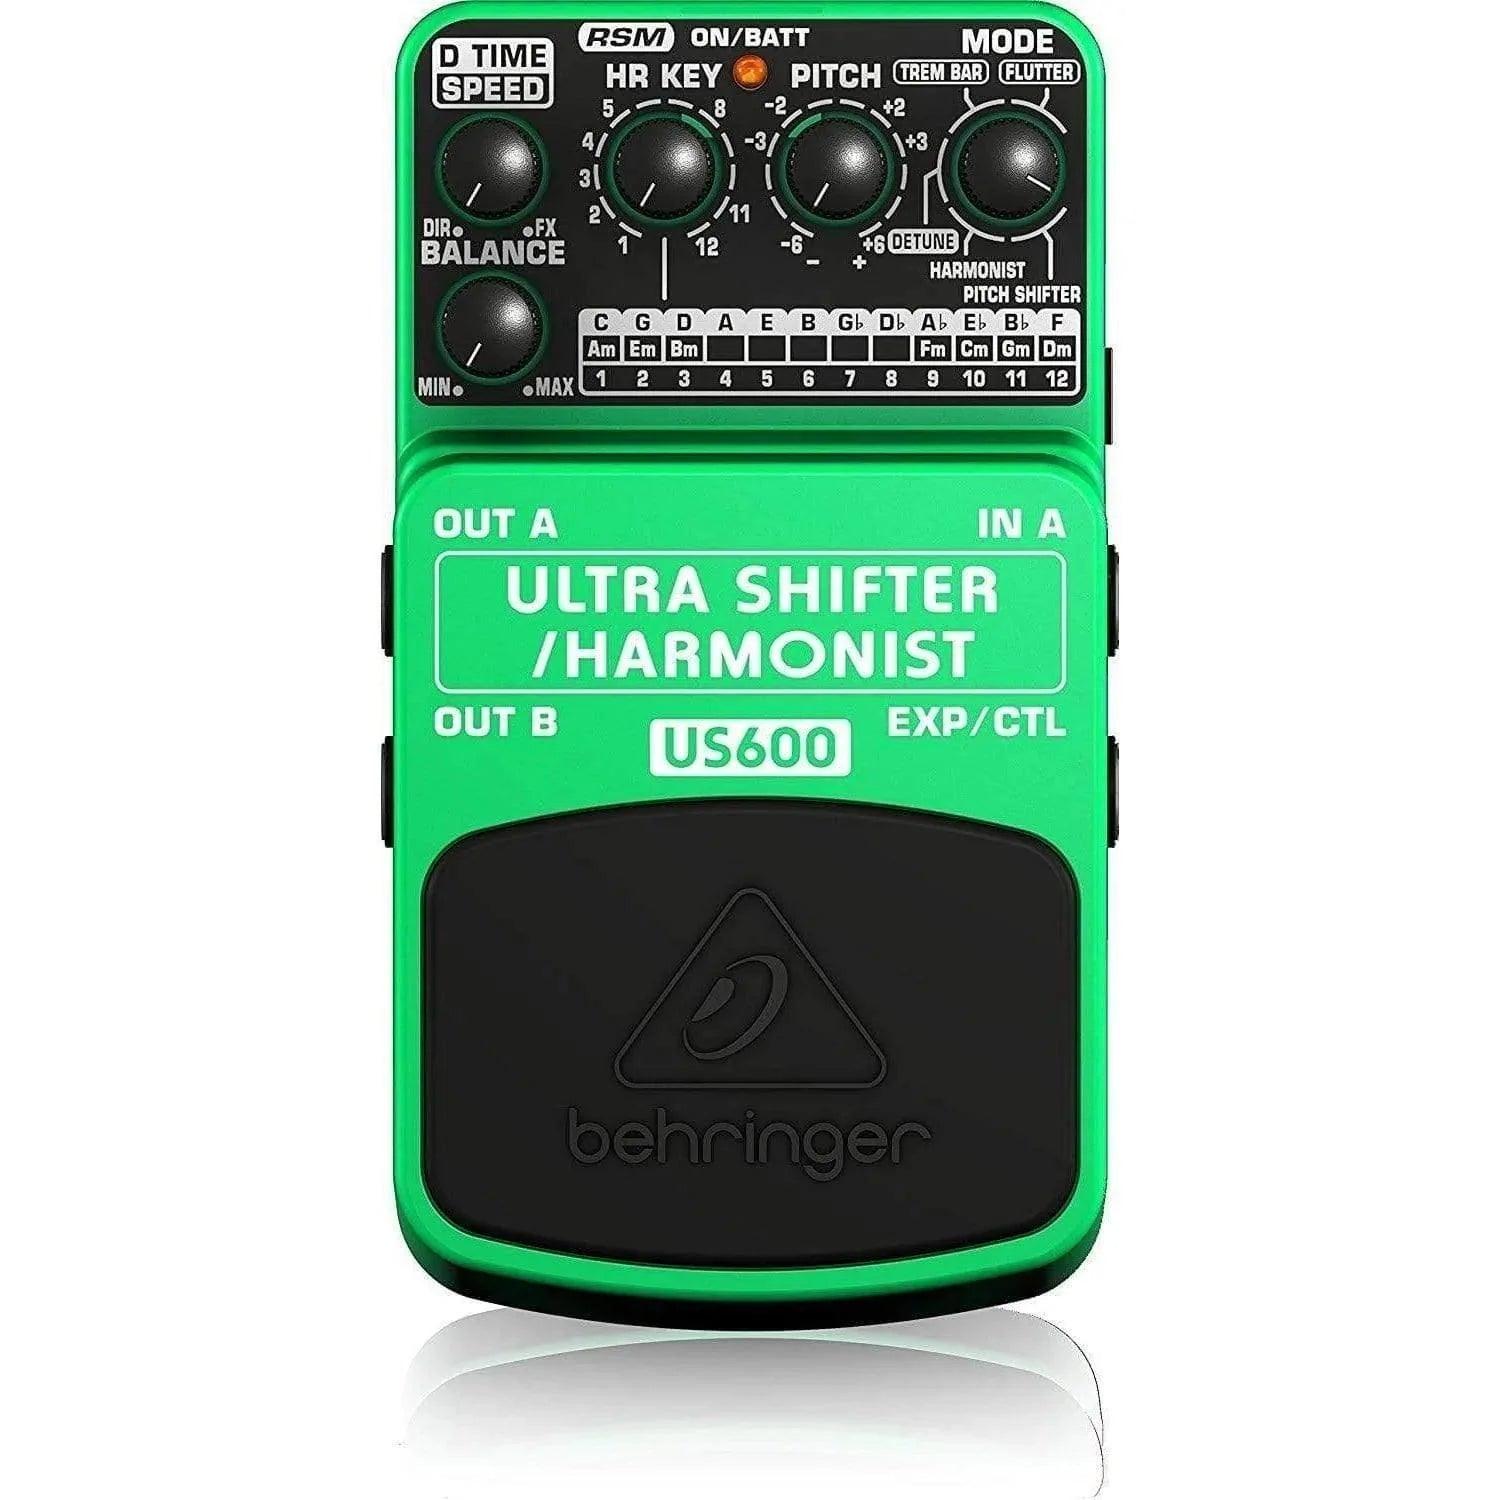 Behringer US600 Ultra Shifter/Harmonist Guitar Effects Pedal